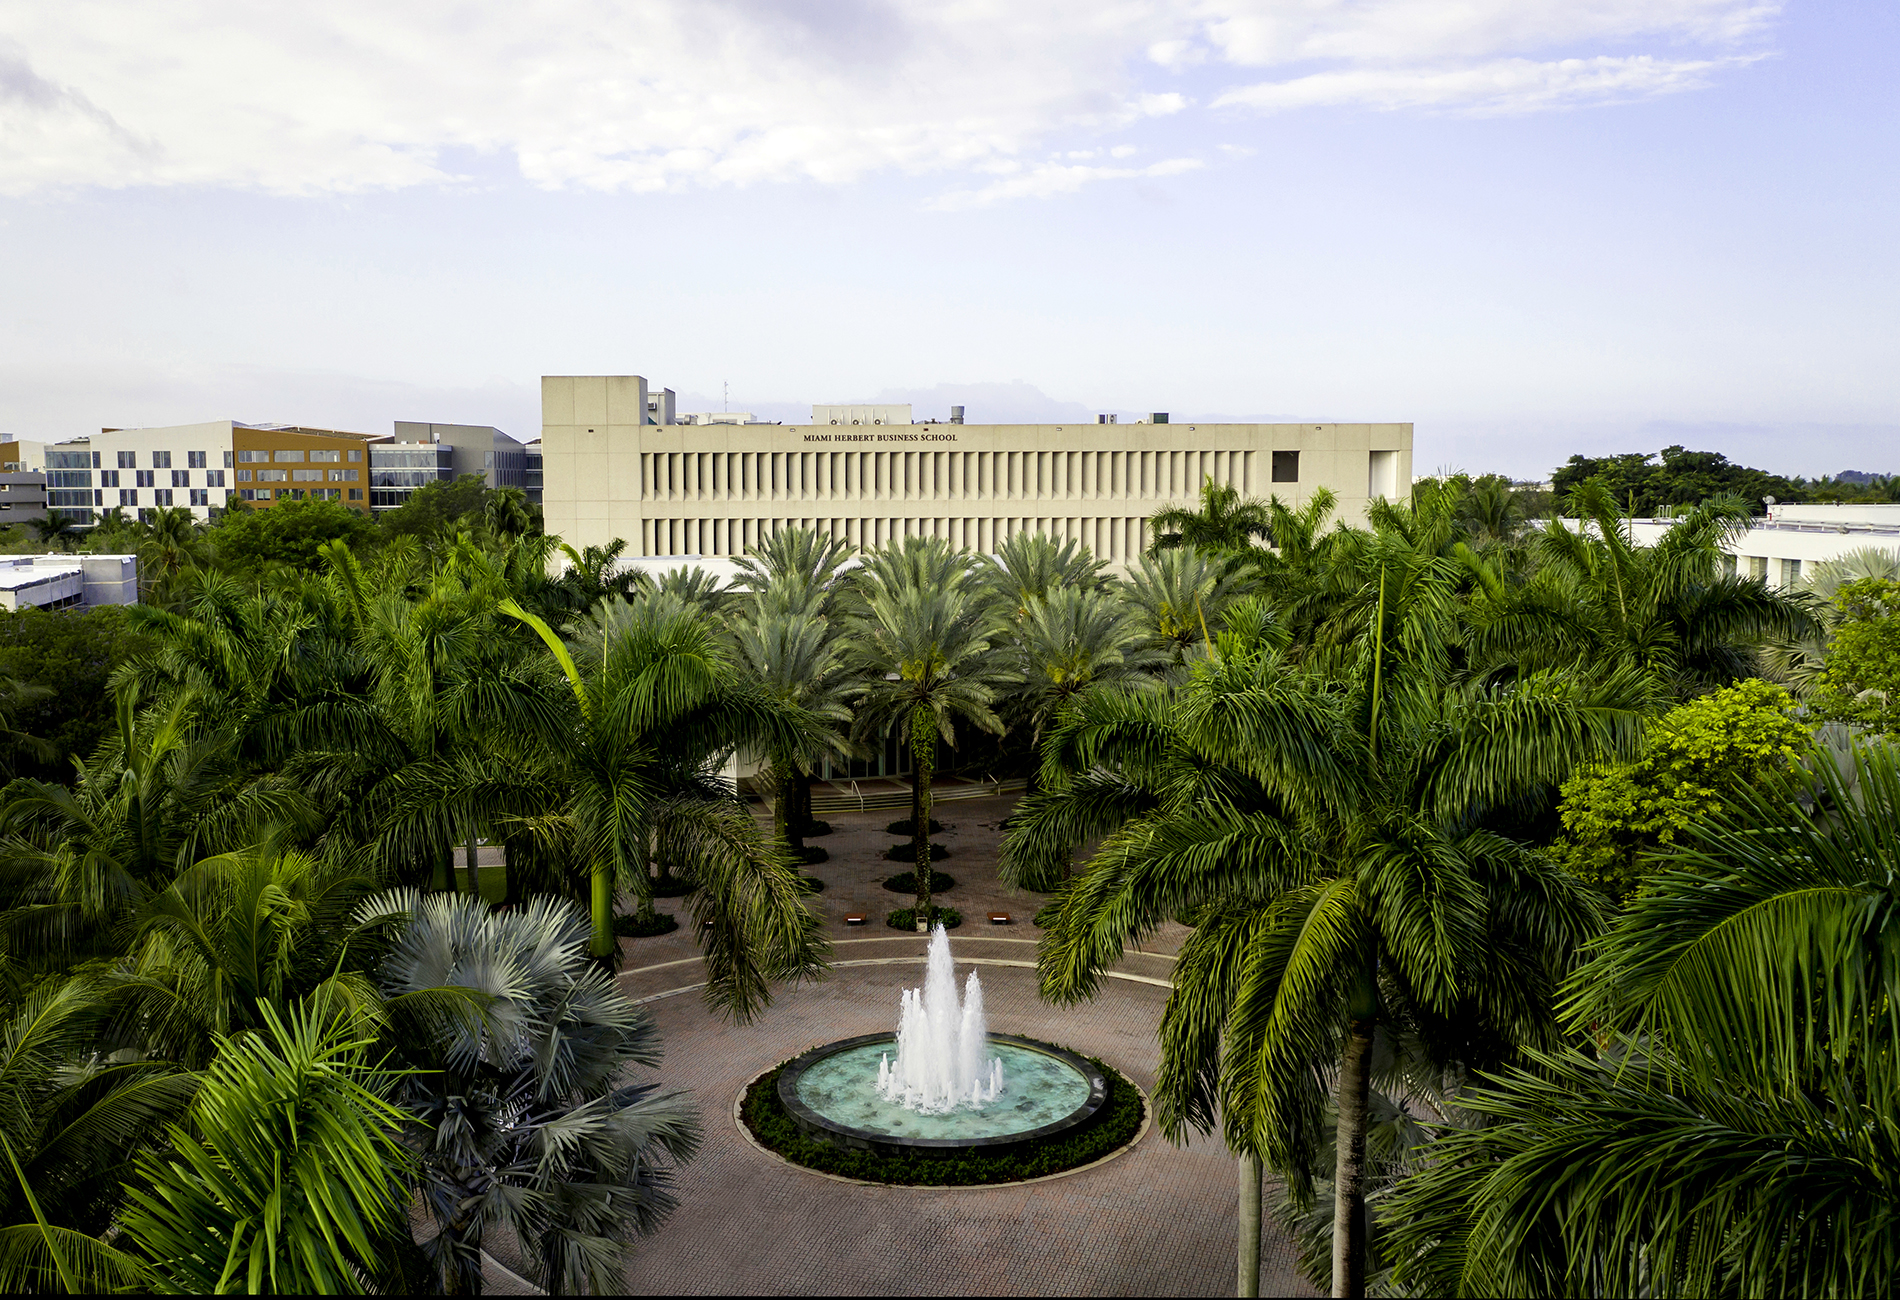 Aerial view of Miami Herbert Business school building, fountain and palm trees in the foreground. 